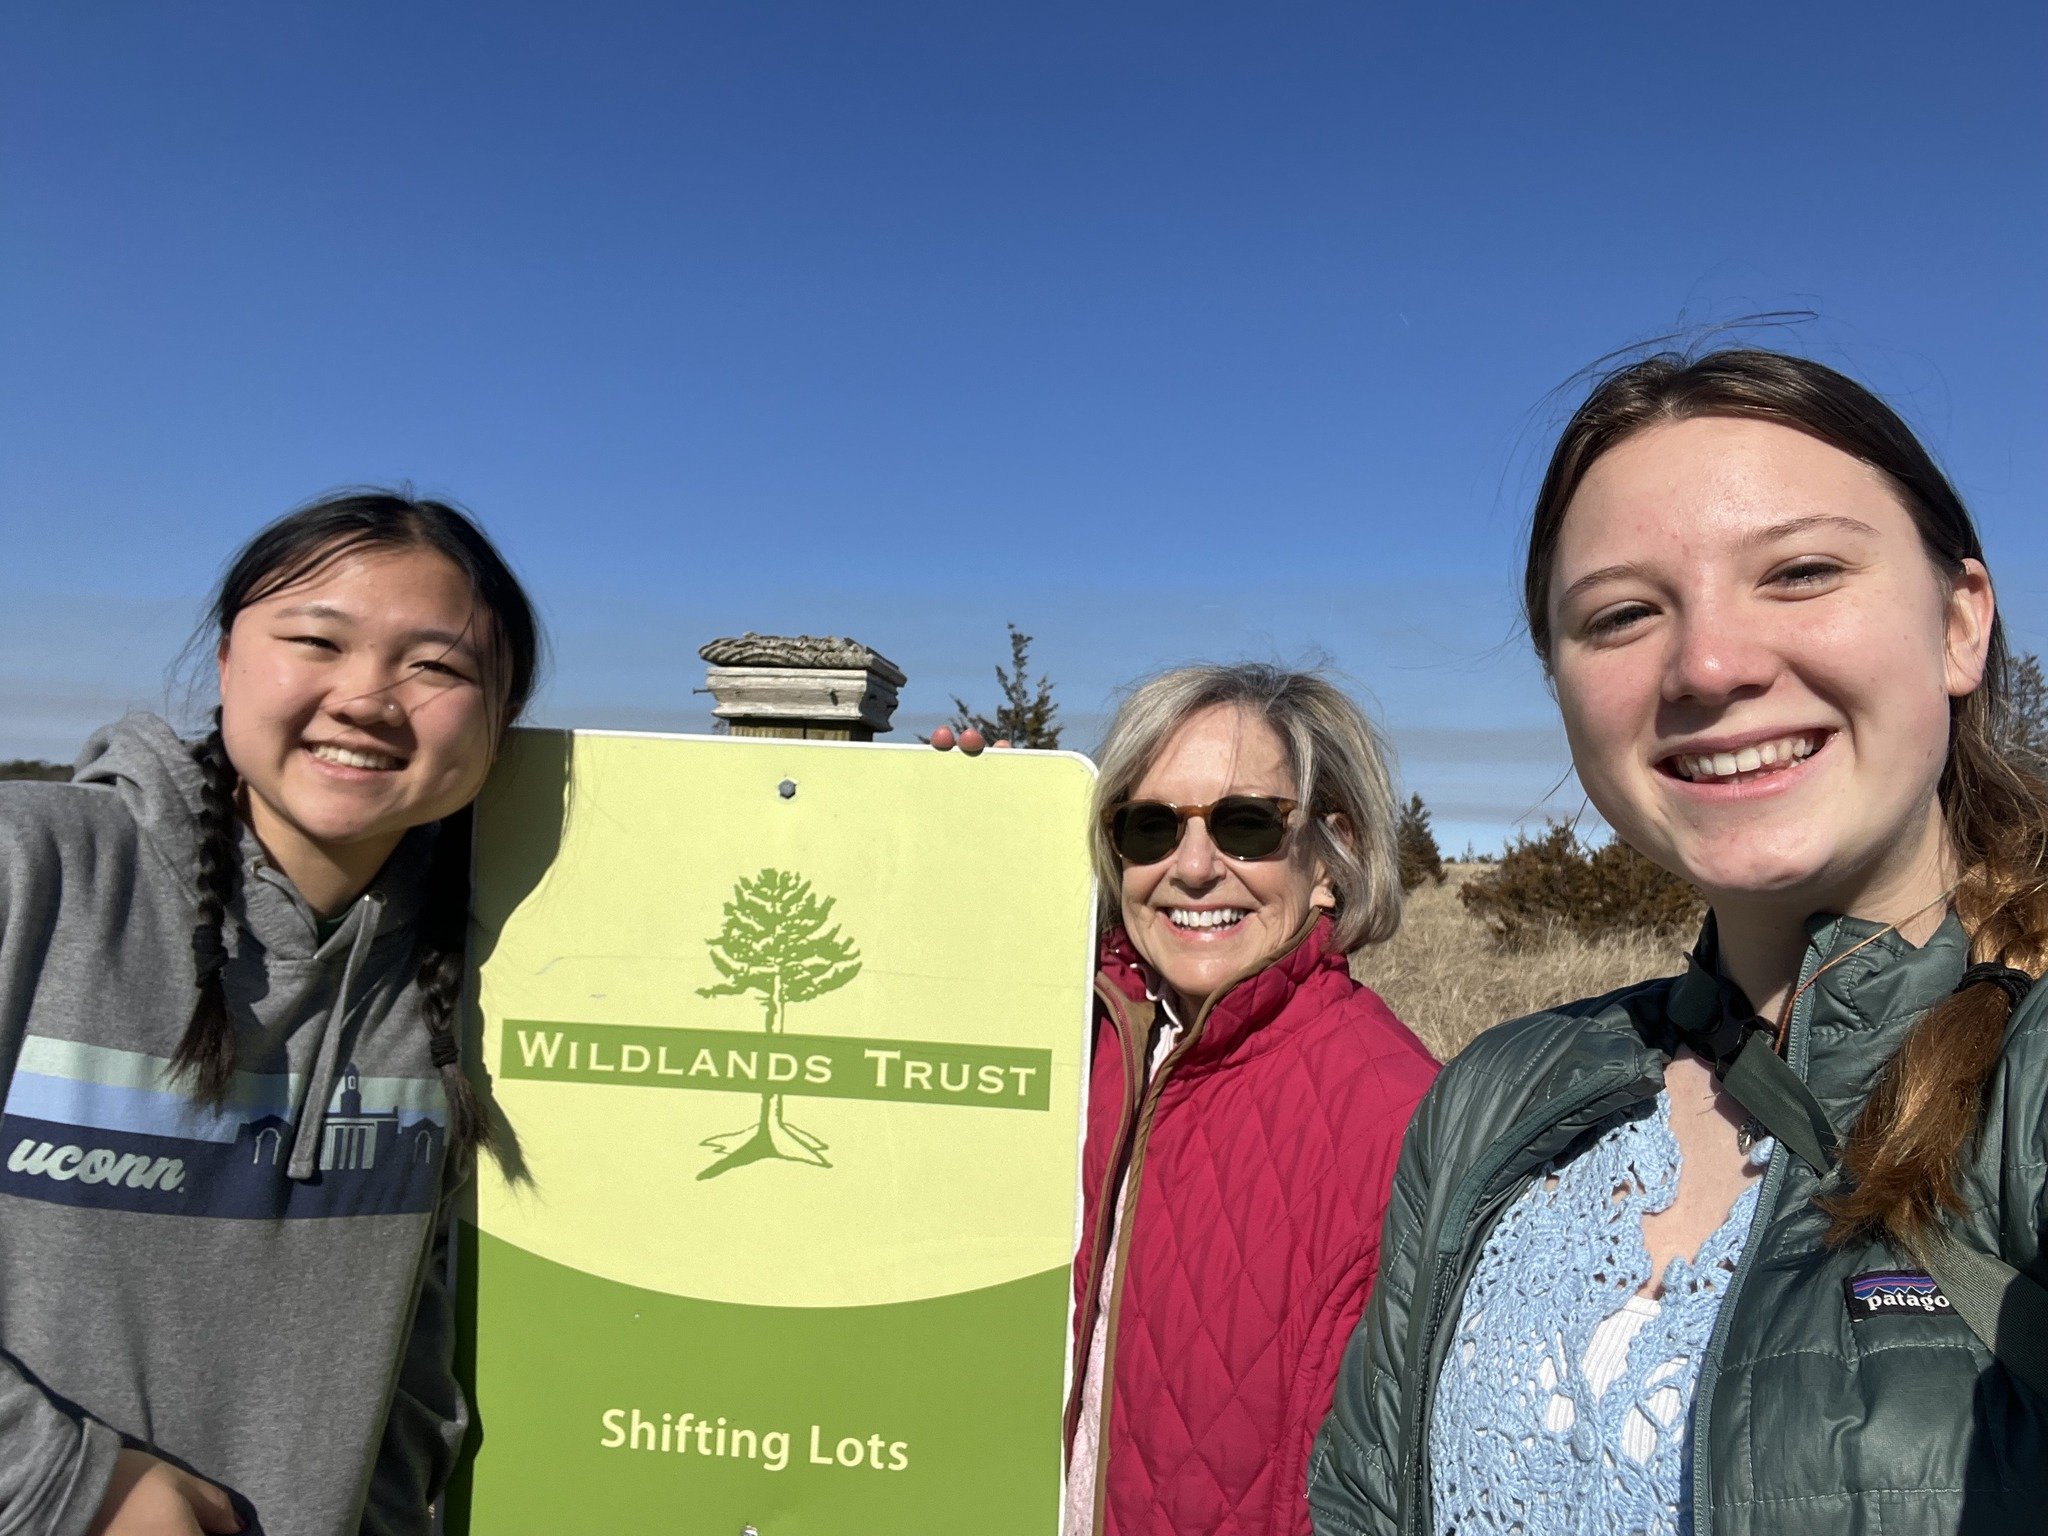 350 miles inland, a show of support for our very own Piping Plovers! 🐣🙌

Kudos to our seasonal land steward Marina Smiarowski for raising $263 for Wildlands Trust through a class project at @suny.esf! Along with classmate Leyna Delmonico, Marina cr